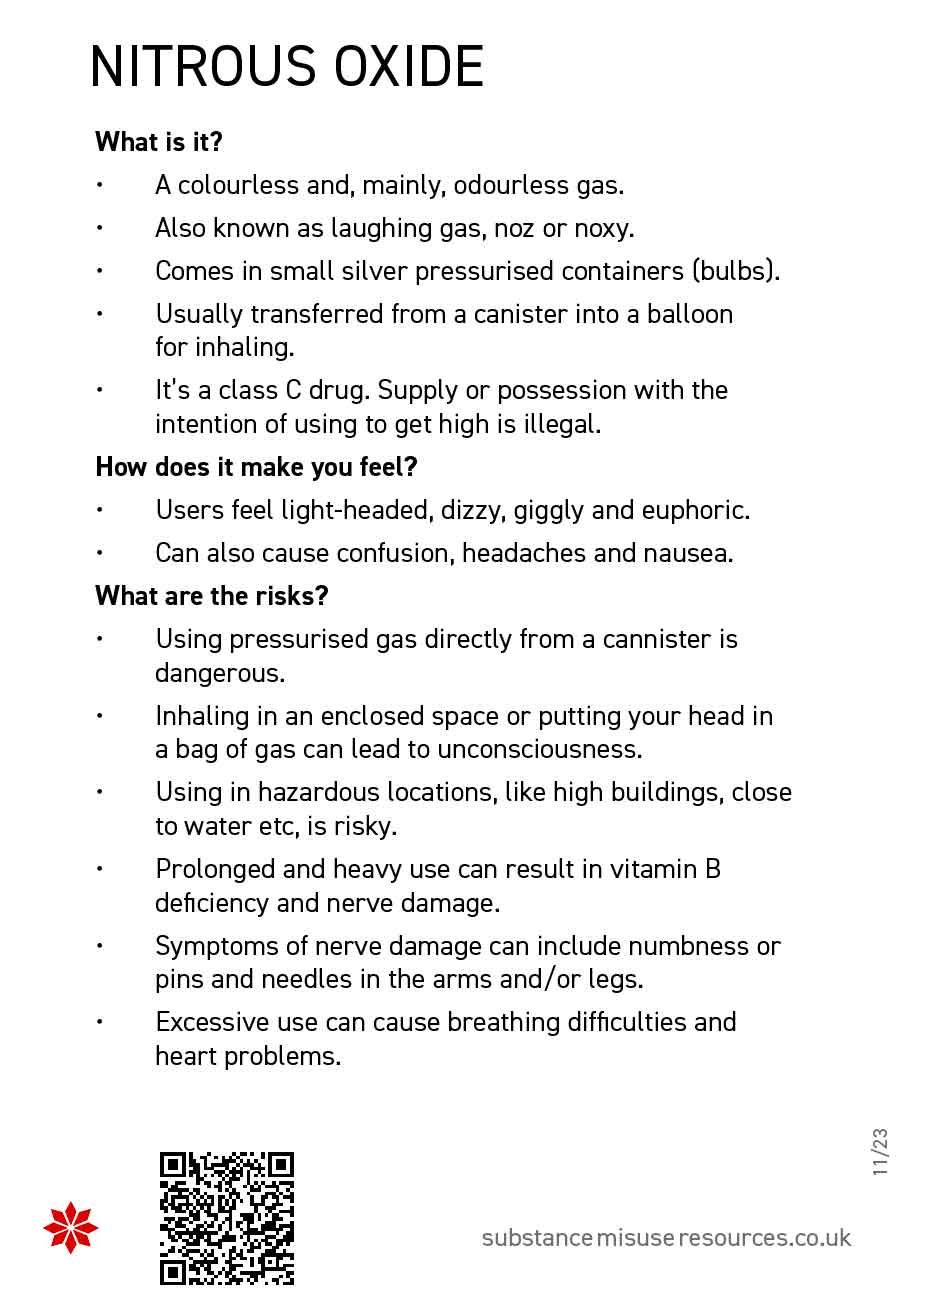 reverse of nitrous oxide information resource showing harm-reduction advice